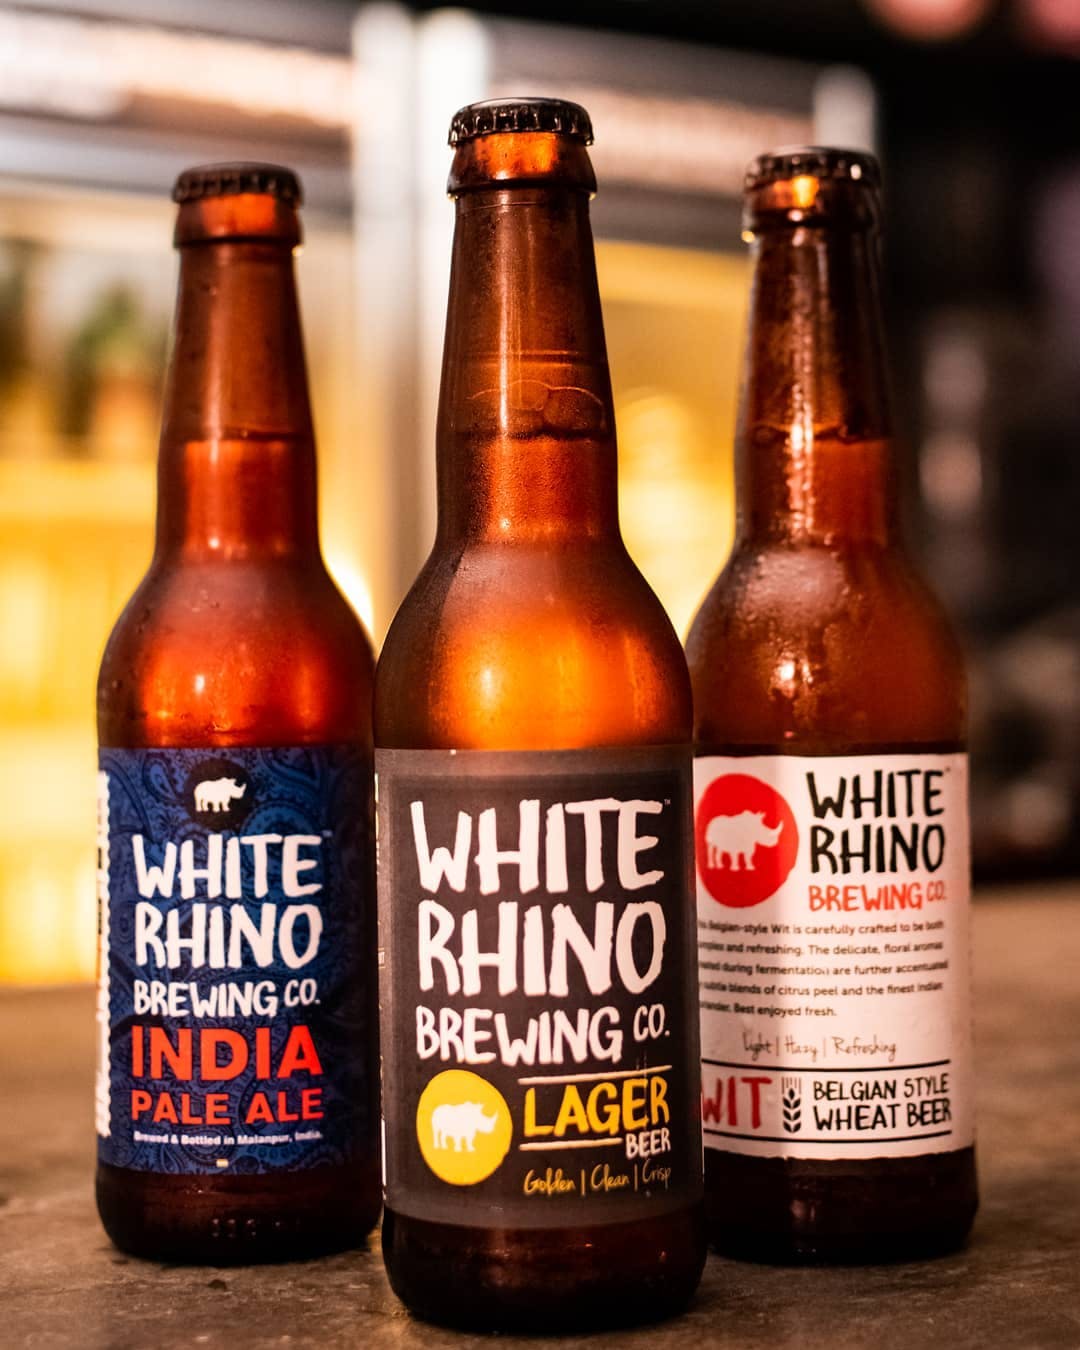 White Rhino Brewing Co For Craft Beer | LBB, Bangalore